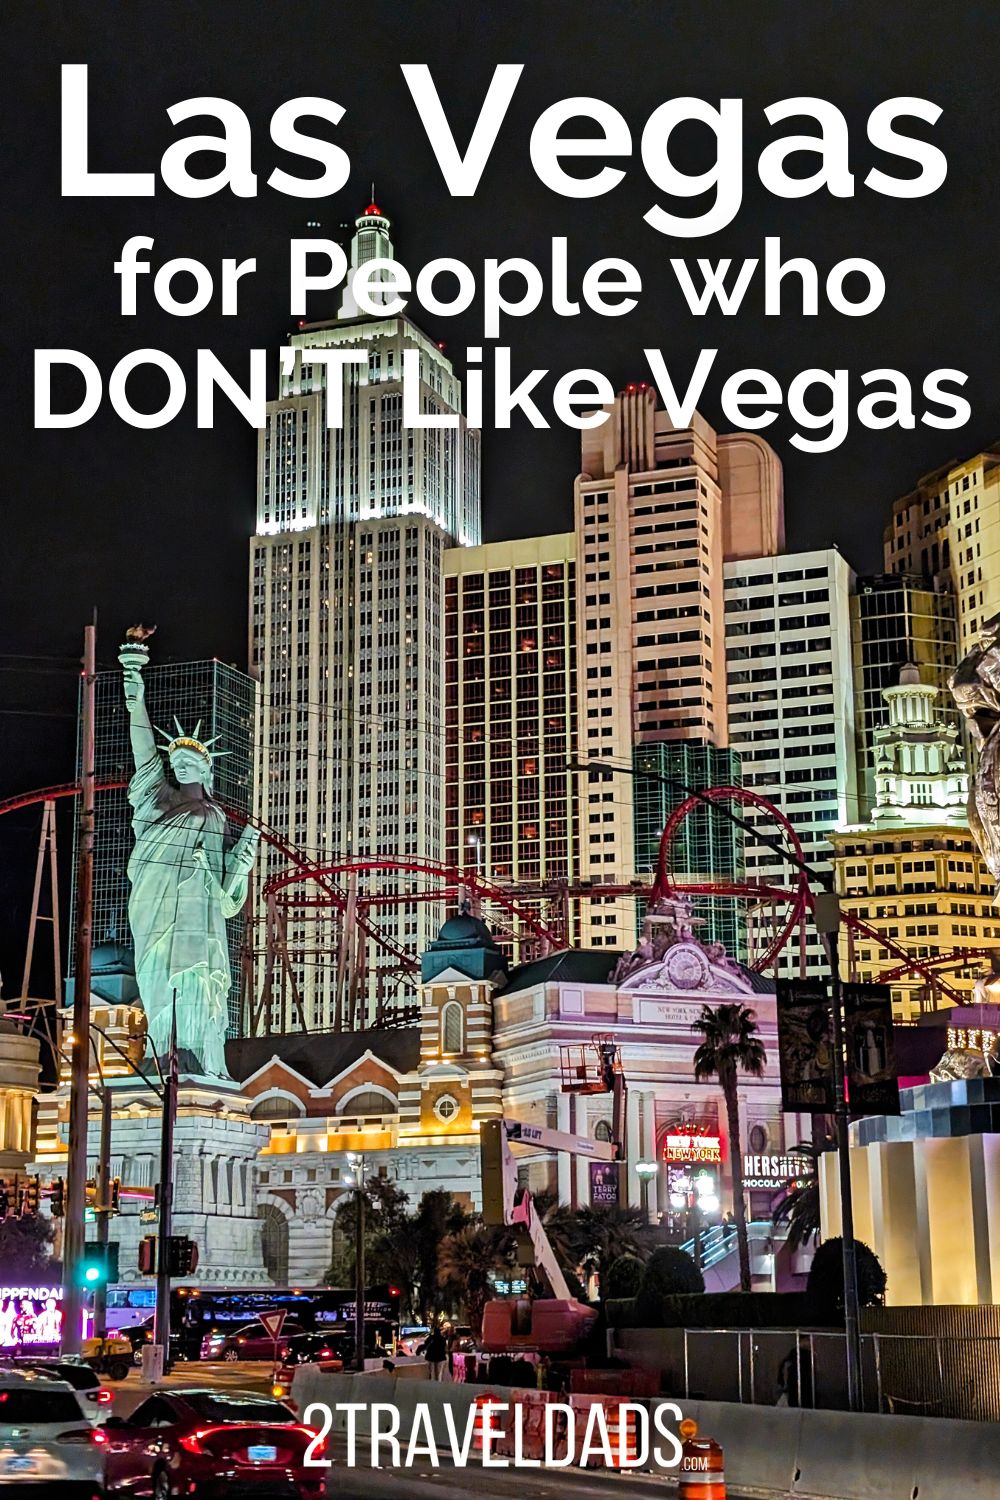 If you're like me, you need to know how to do Las Vegas for people who don't like Vegas. Avoiding the casinos and smokey environments is easy, and there are many fun things to do in Las Vegas that aren't gambling. You just need to know where to look, which we've got covered!